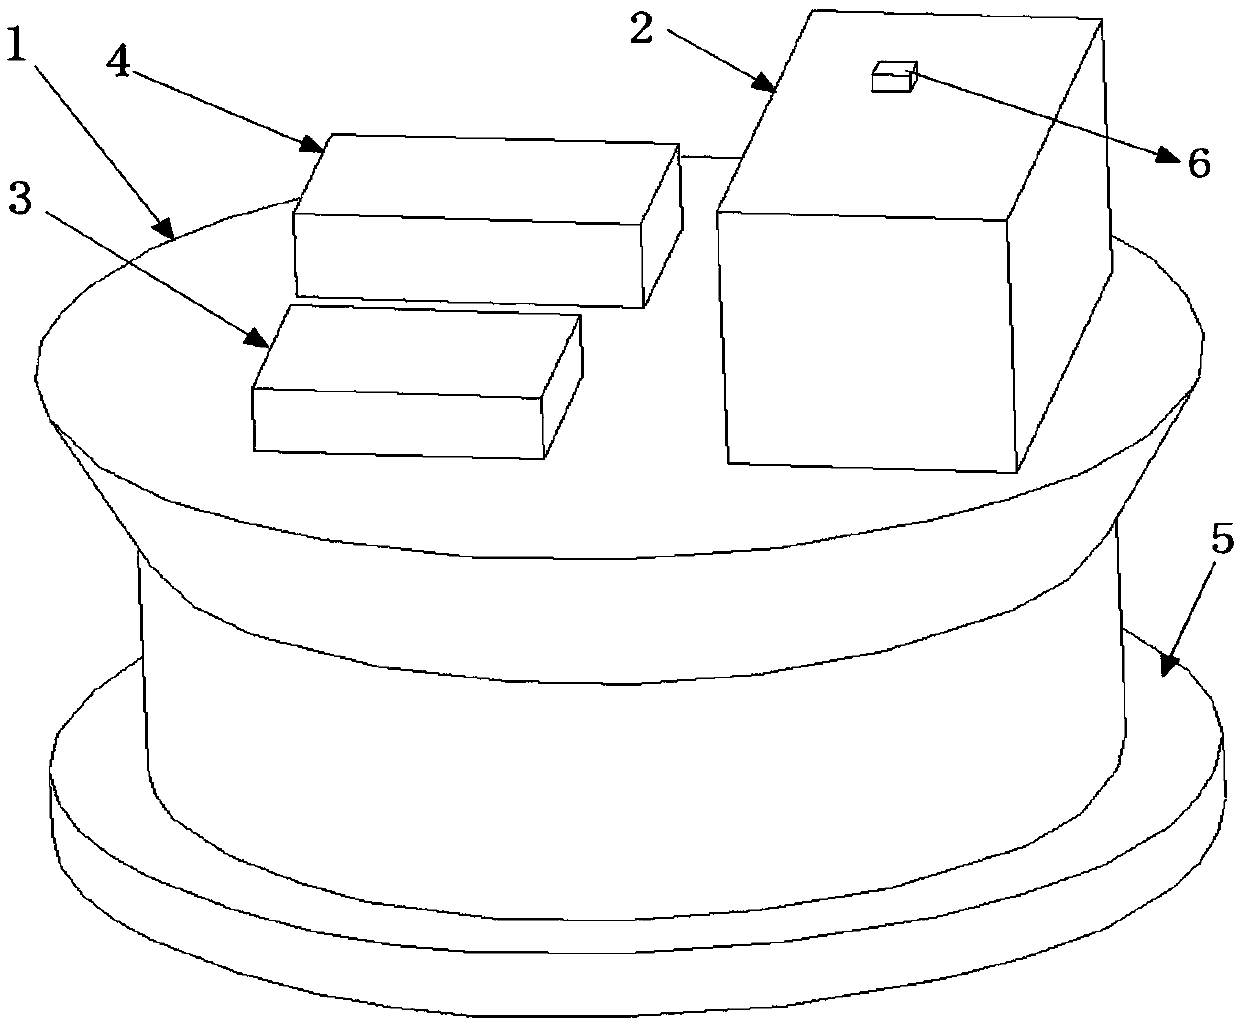 Oversea floating type nuclear power generating device of polygonal structure